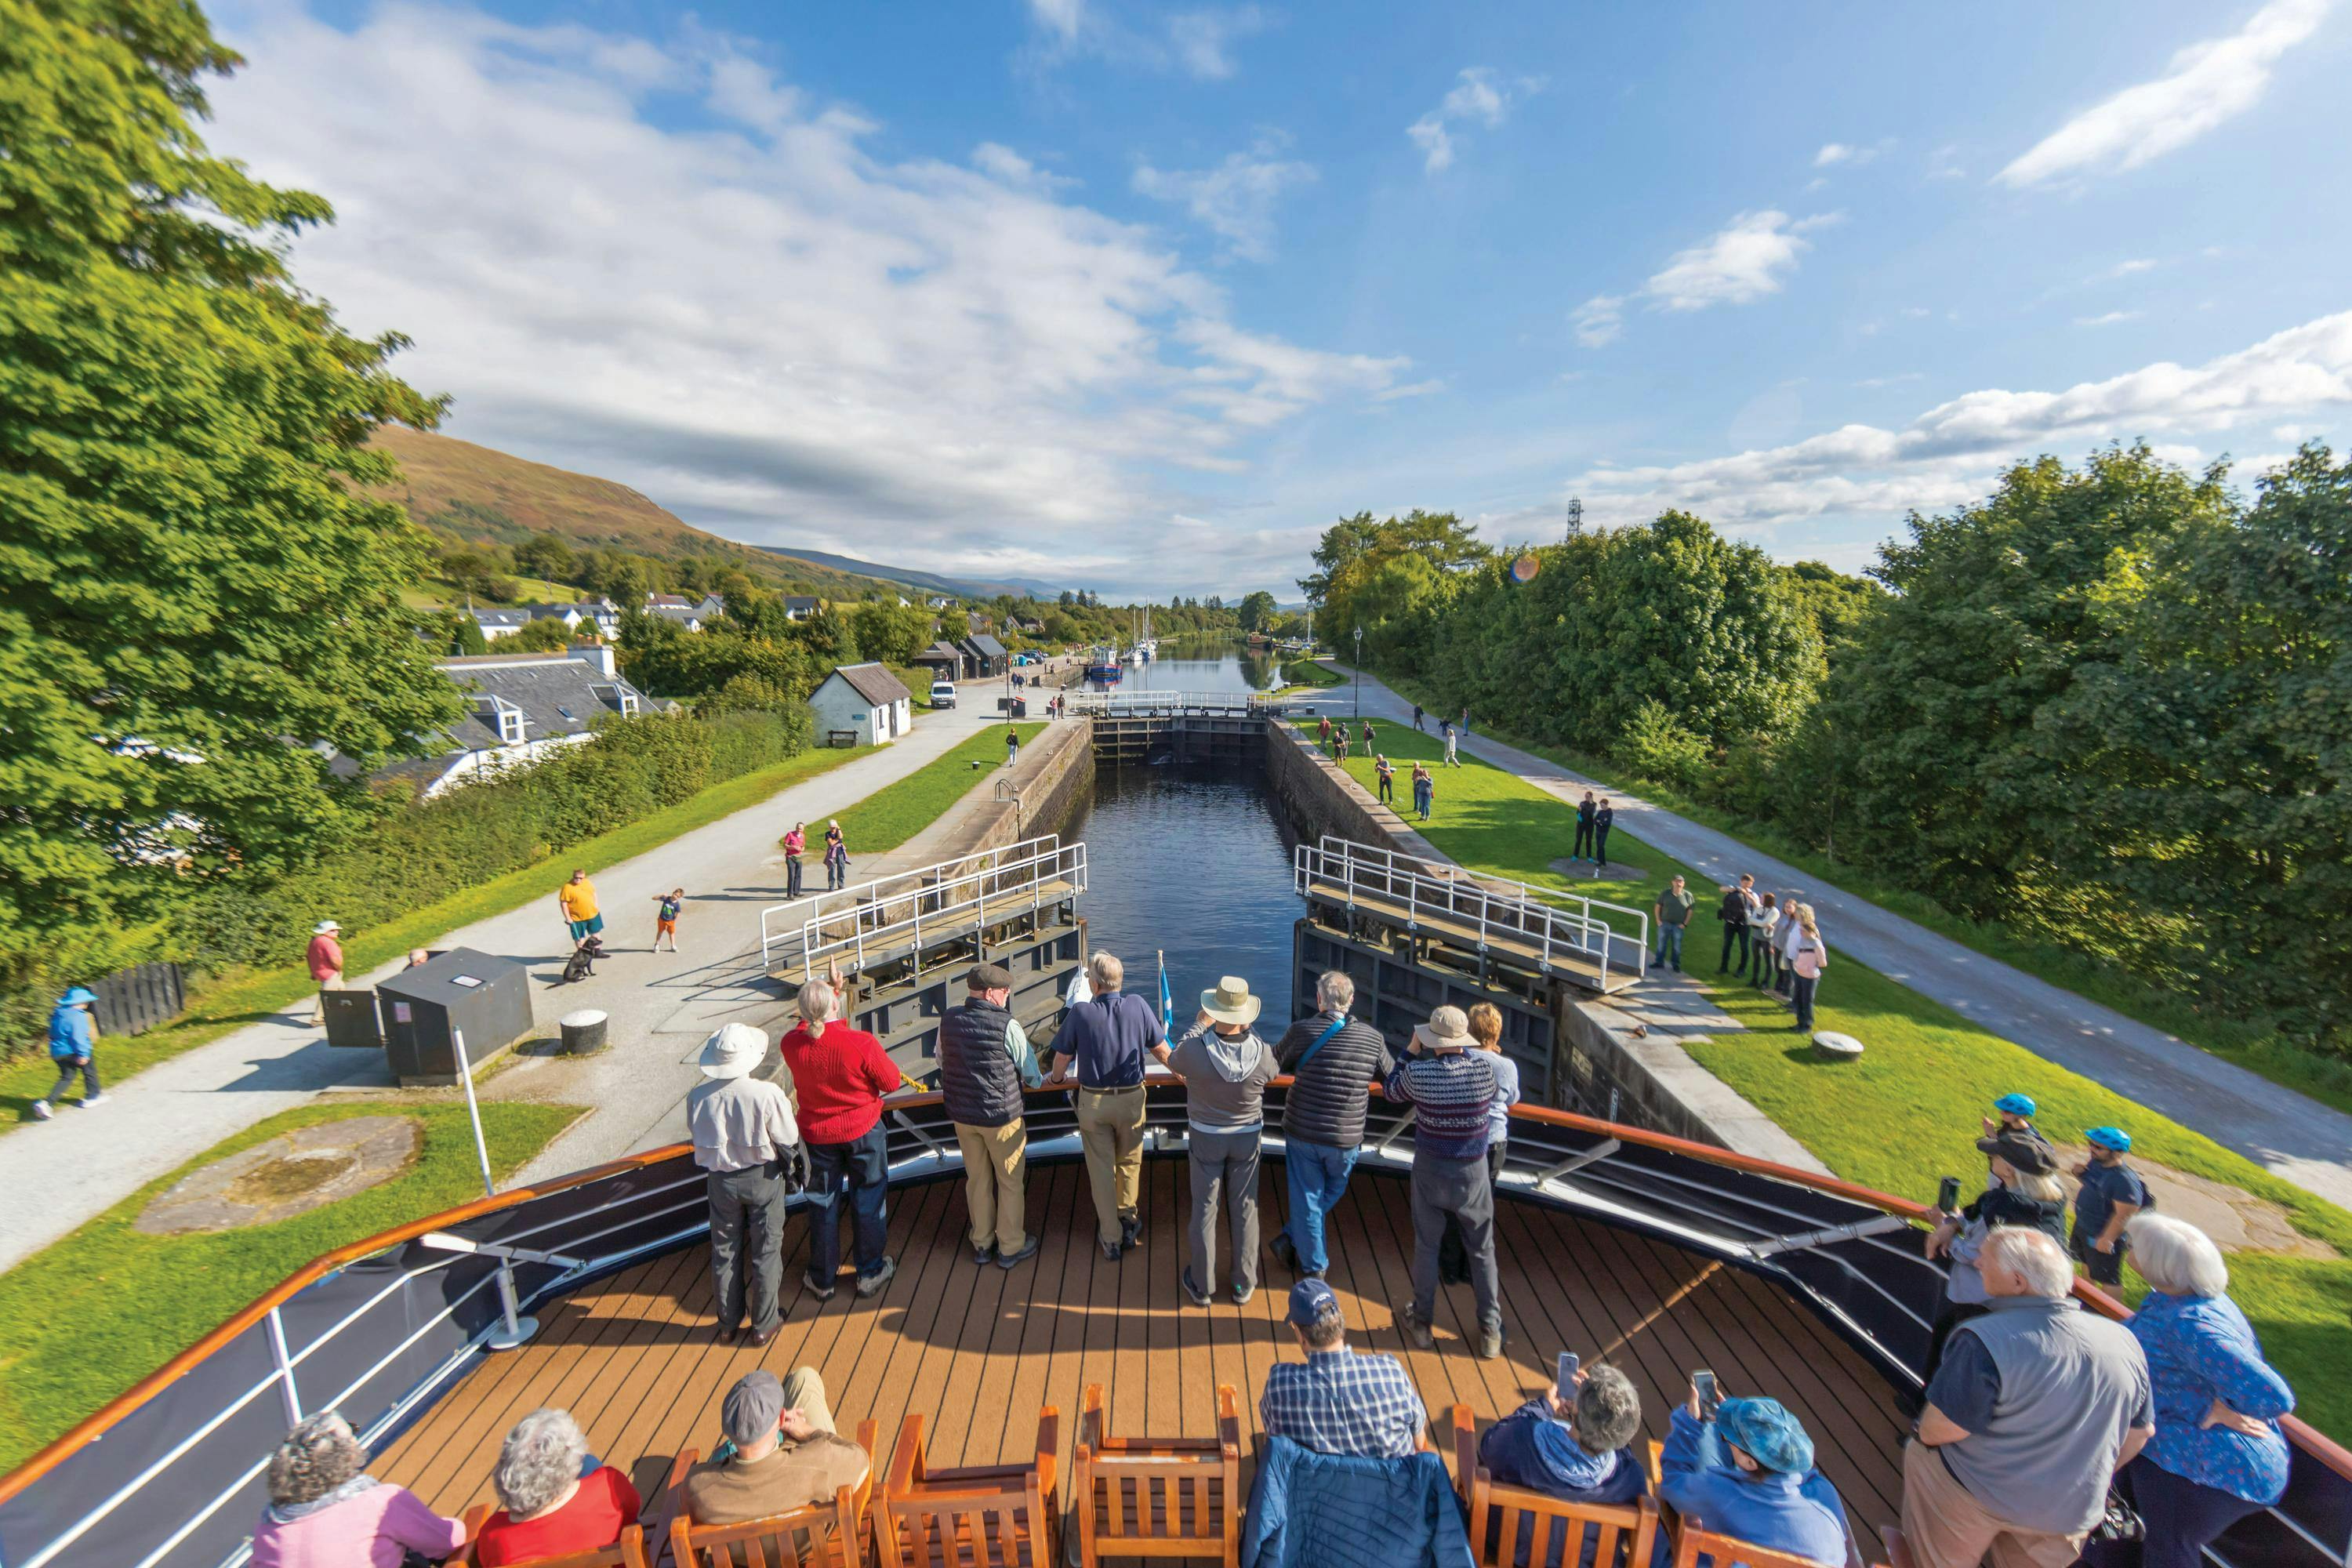 Guests watch on as Lord of the Glens transits the lock system on the Caledonian Canal, Scotland.